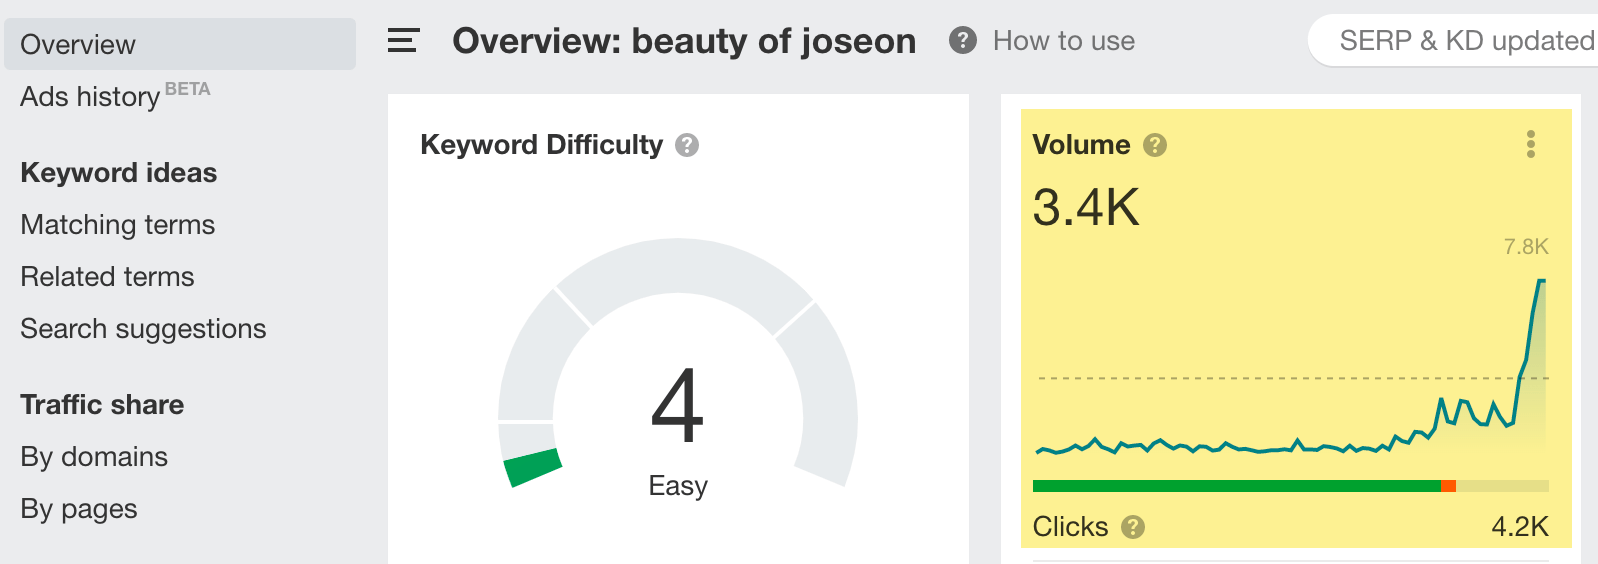 Keyword Explorer overview for "beauty of joseon" 